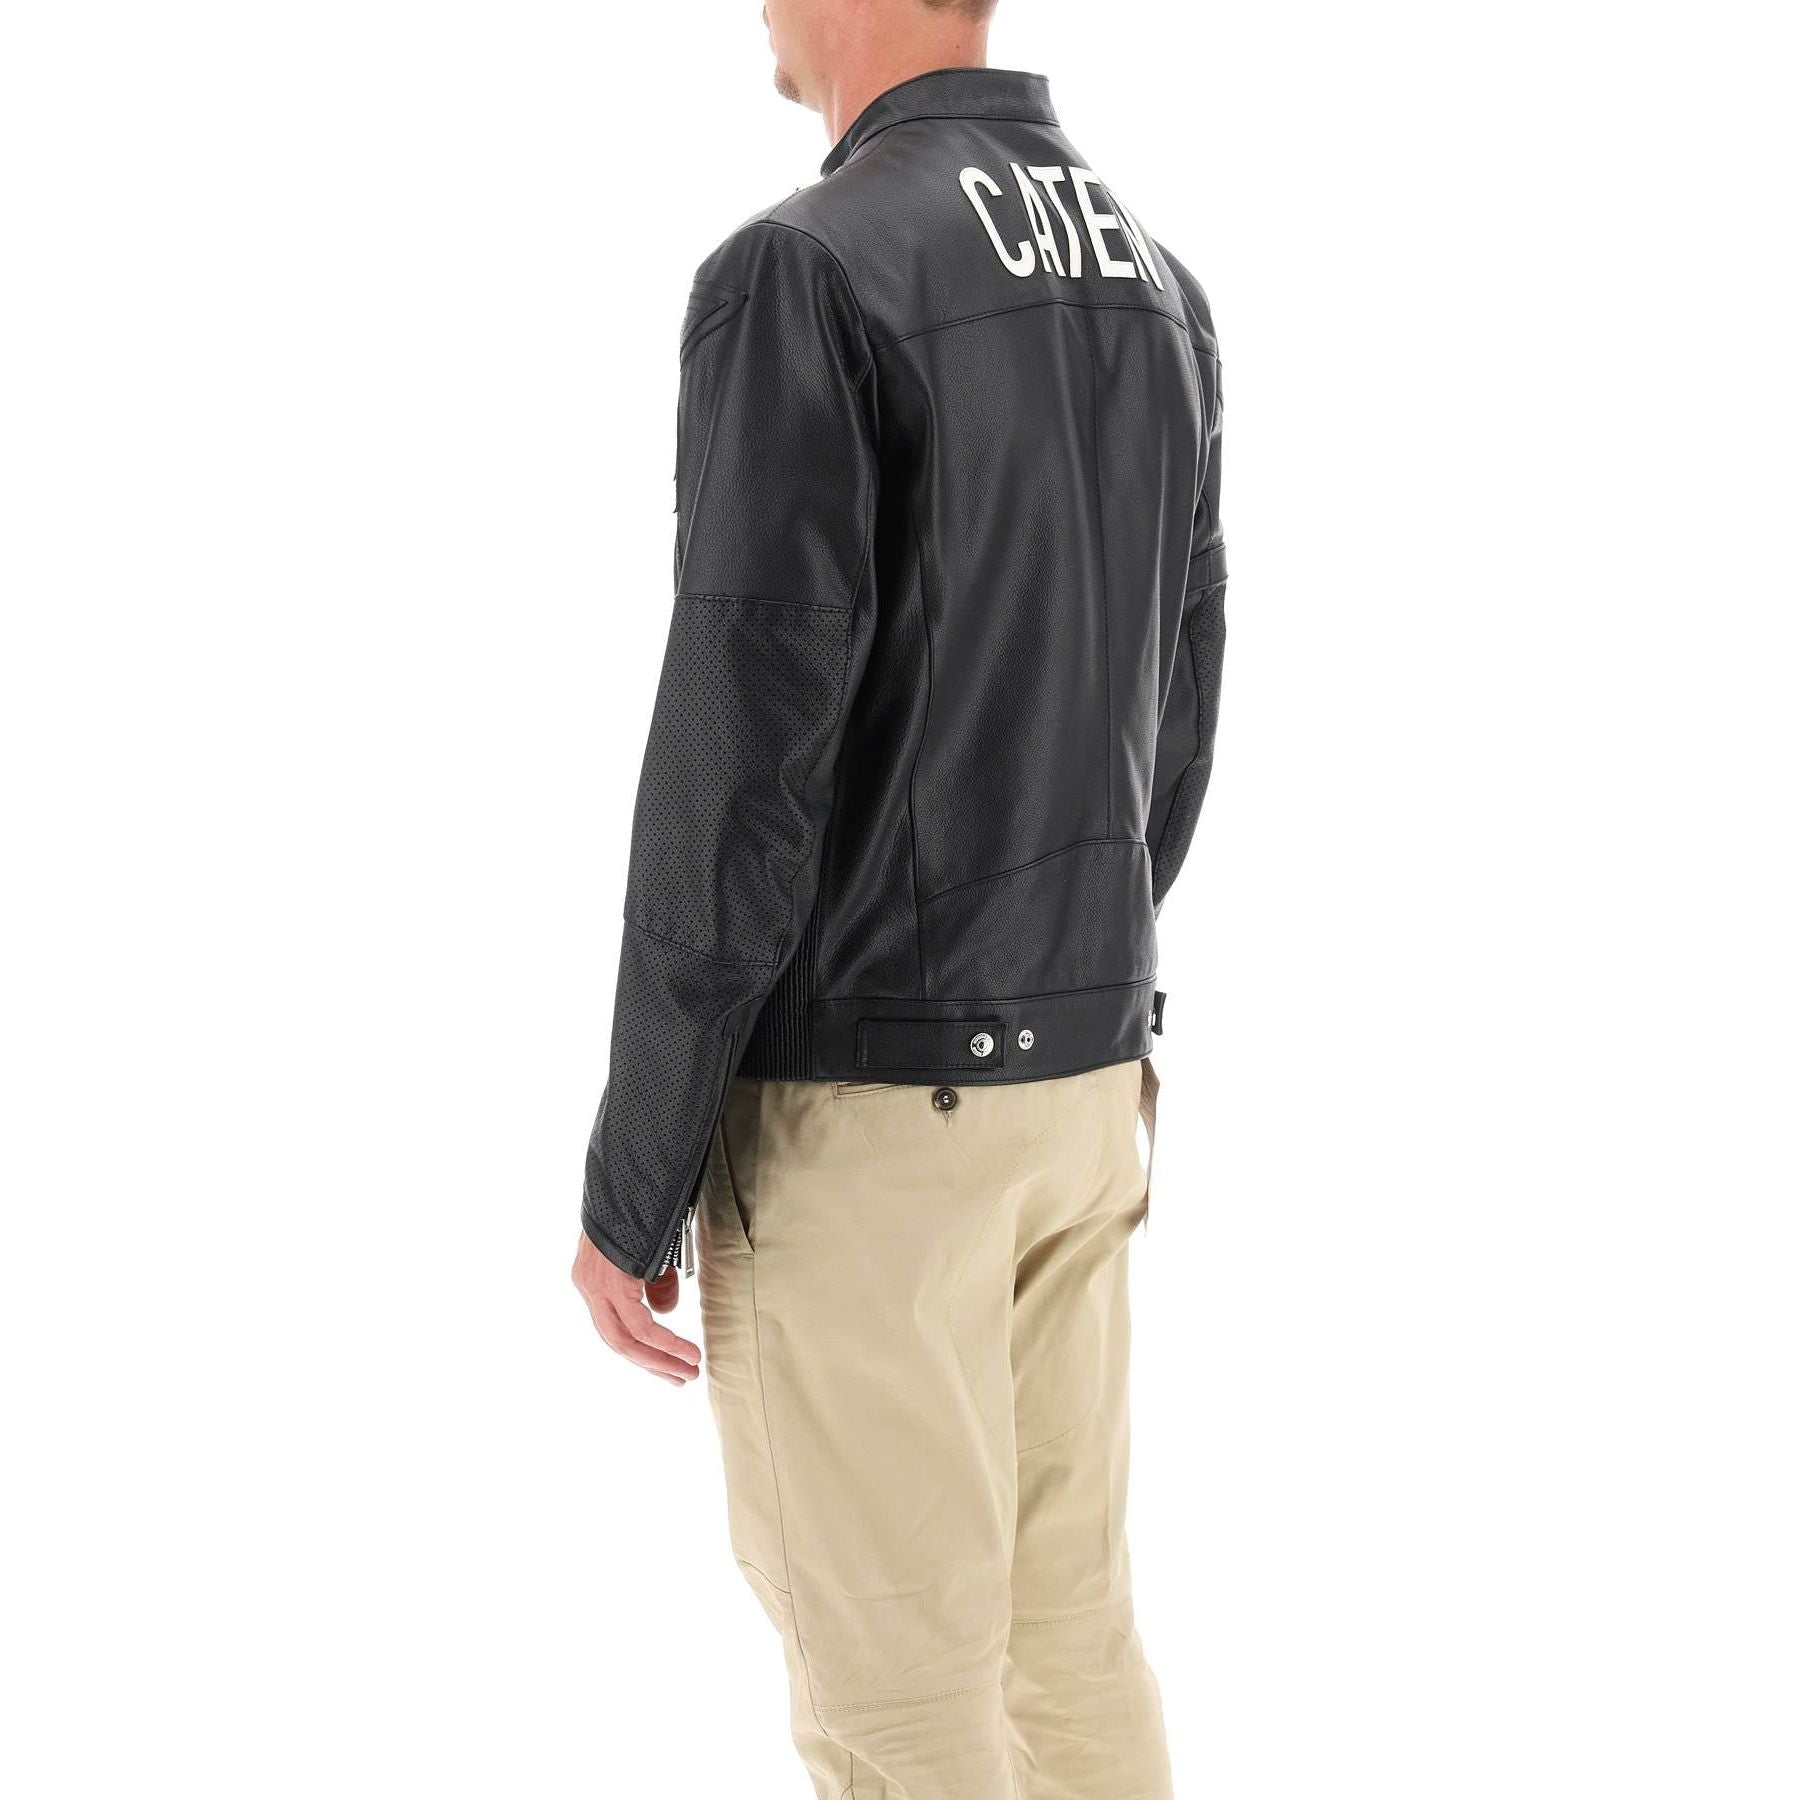 Leather Biker Jacket With Contrasting Lettering